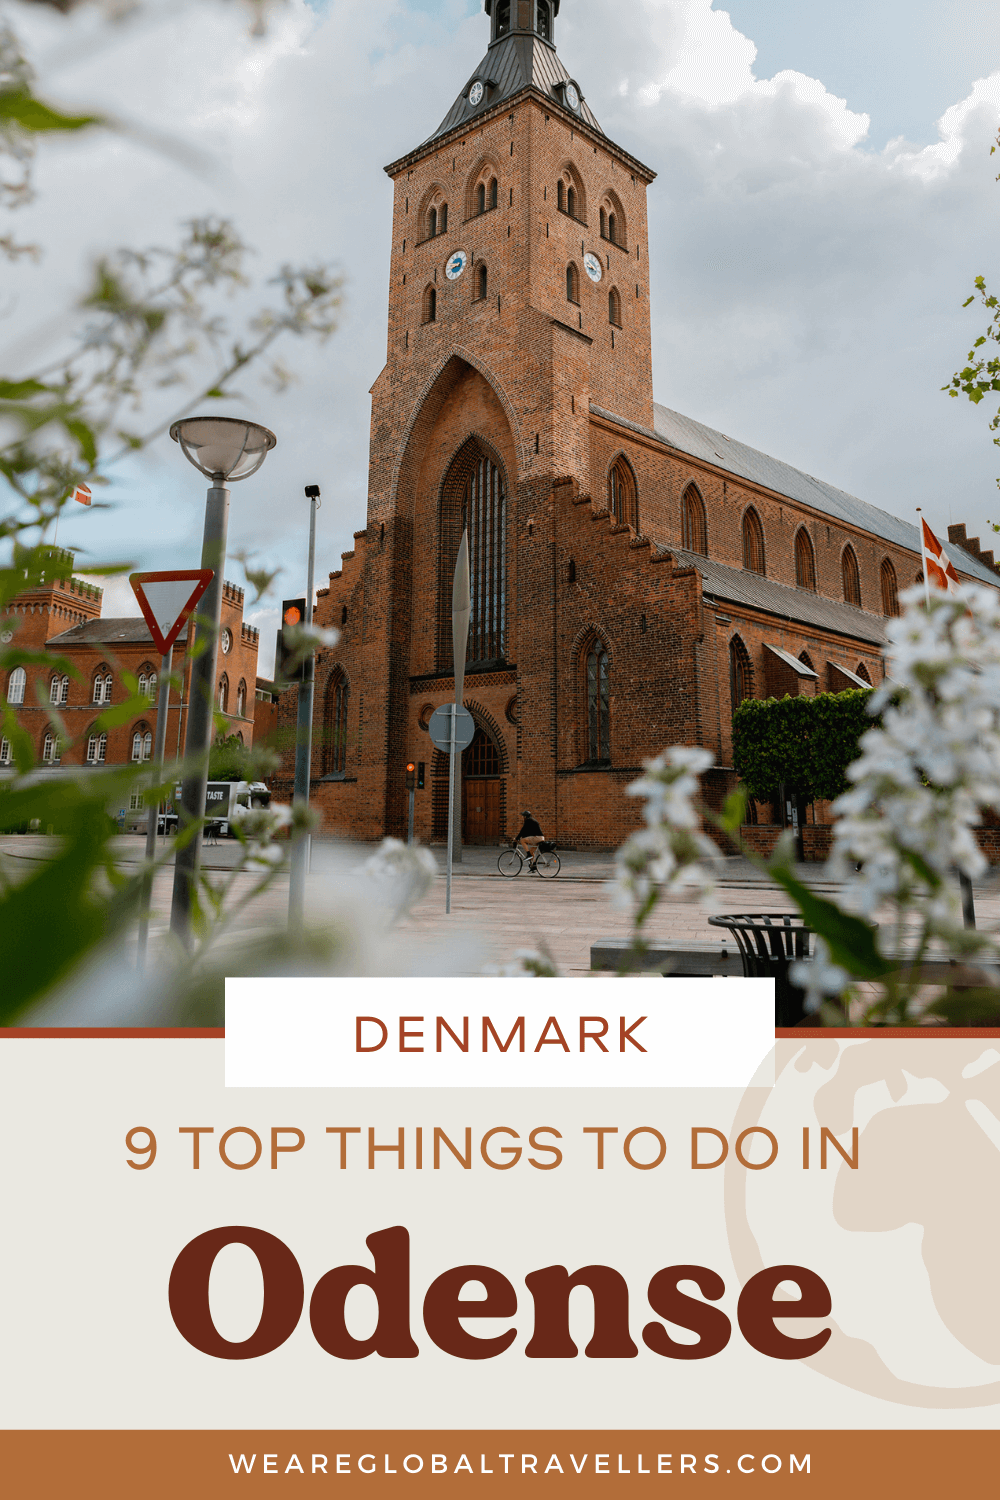 The best nature spots in Denmark